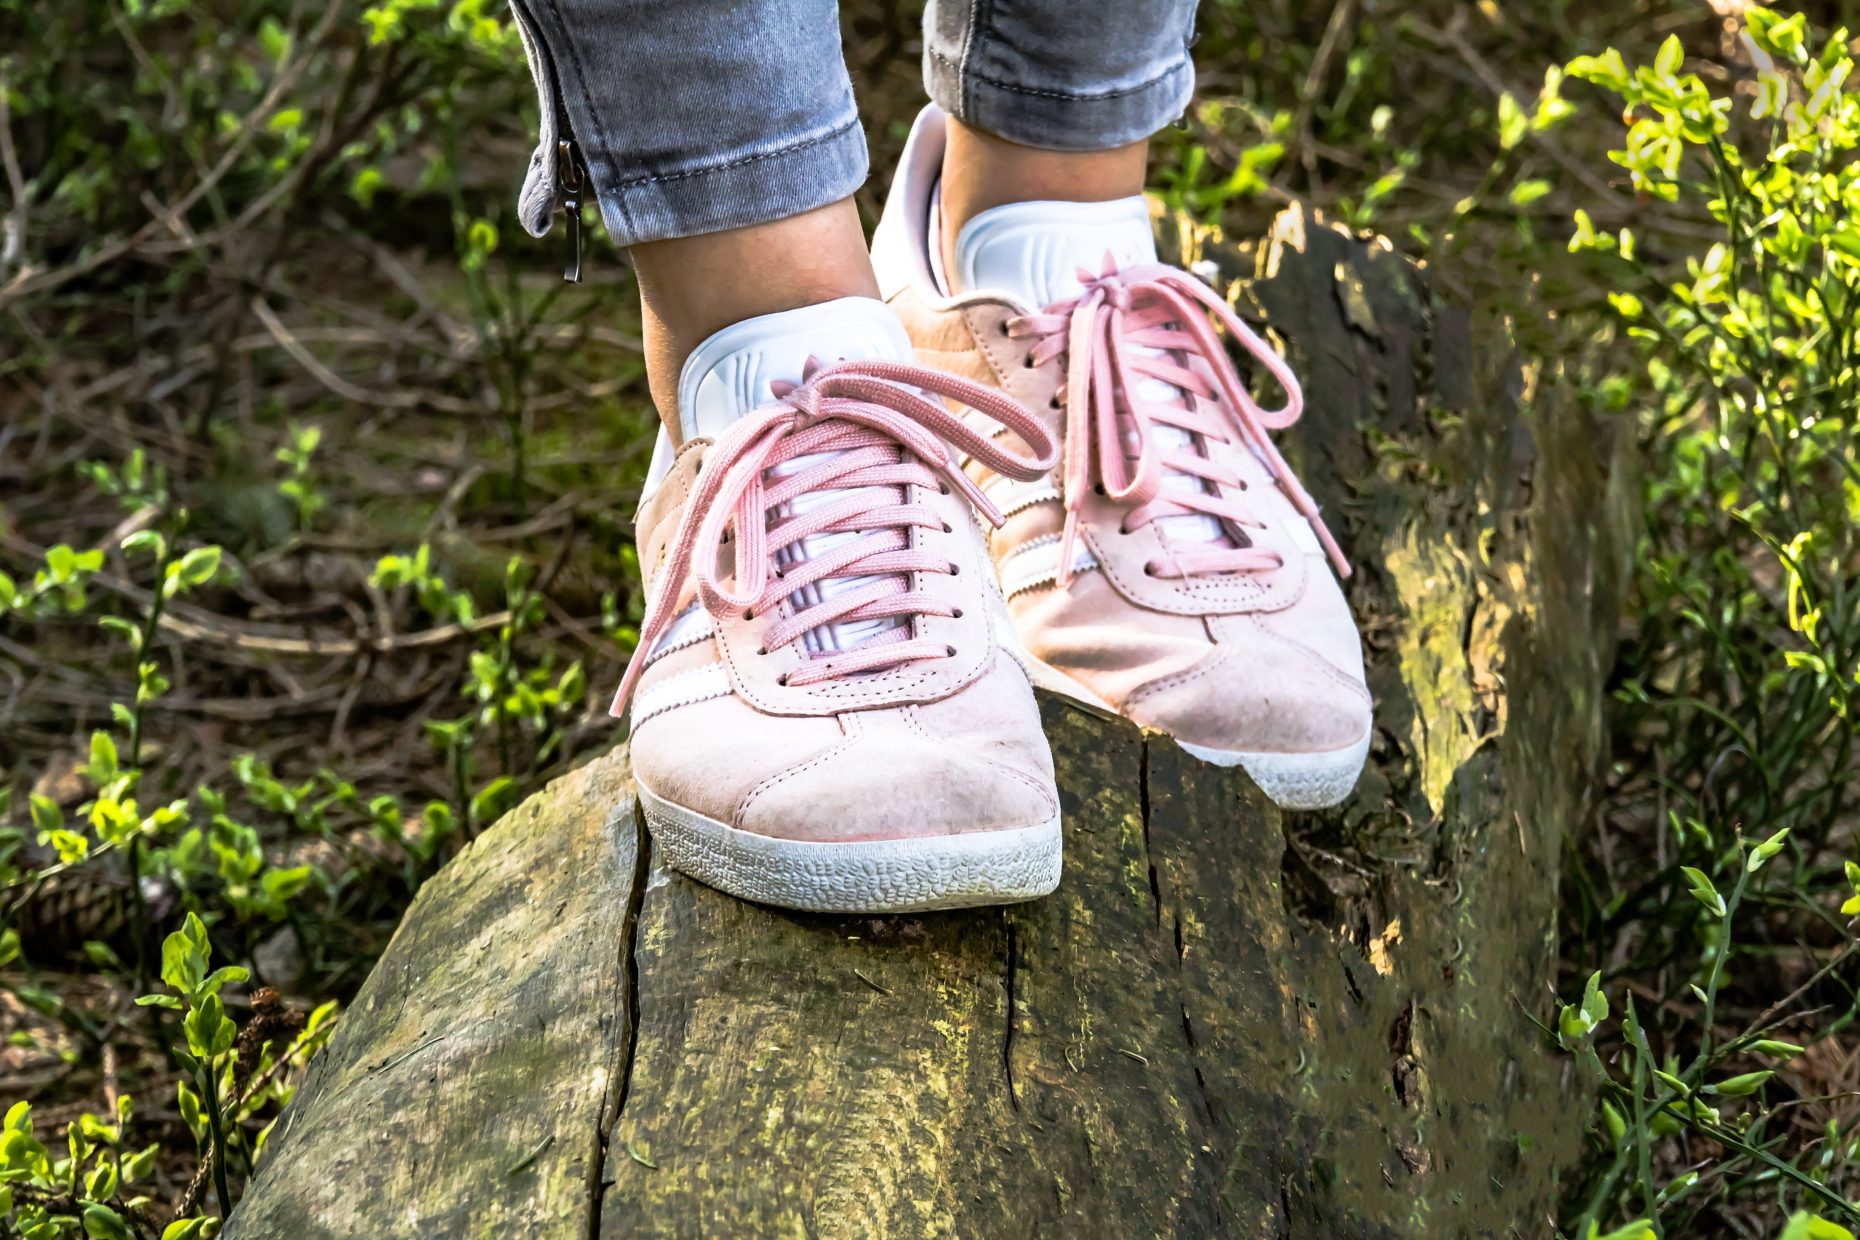 Picture of lower legs of woman balancing on a log wearing sneakers